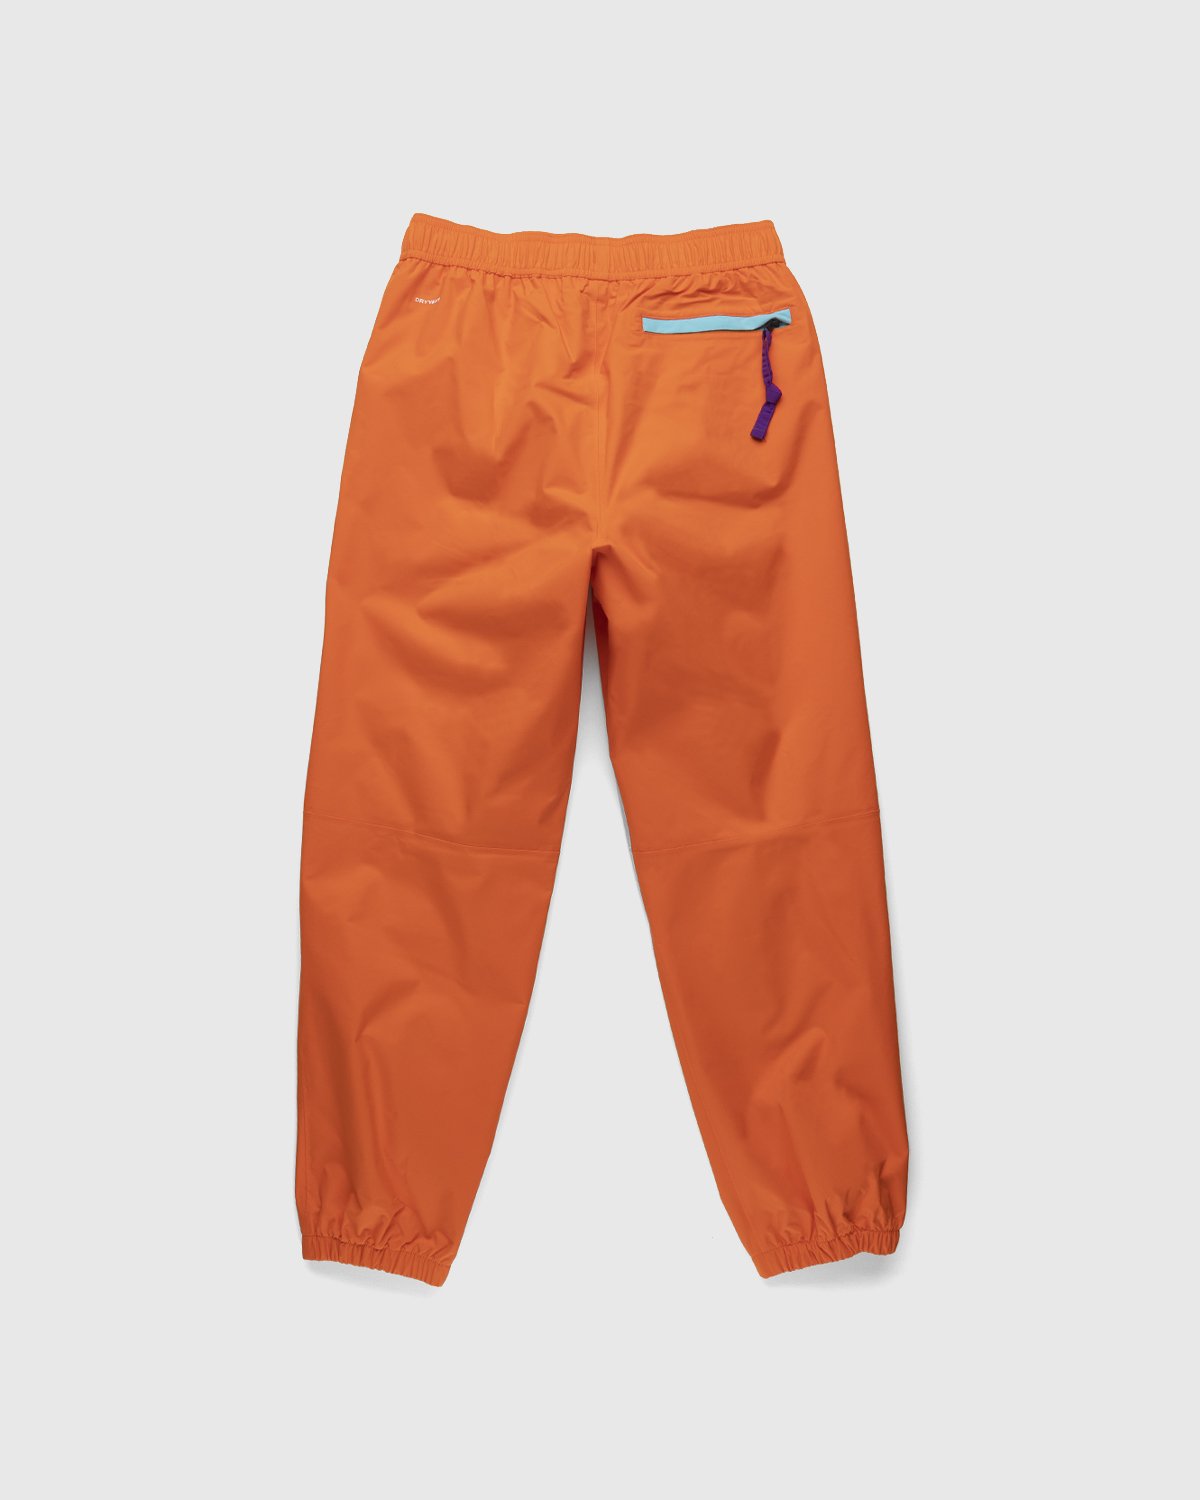 The North Face - Trans Antarctica Expedition Pant Red Orange - Clothing - Orange - Image 2